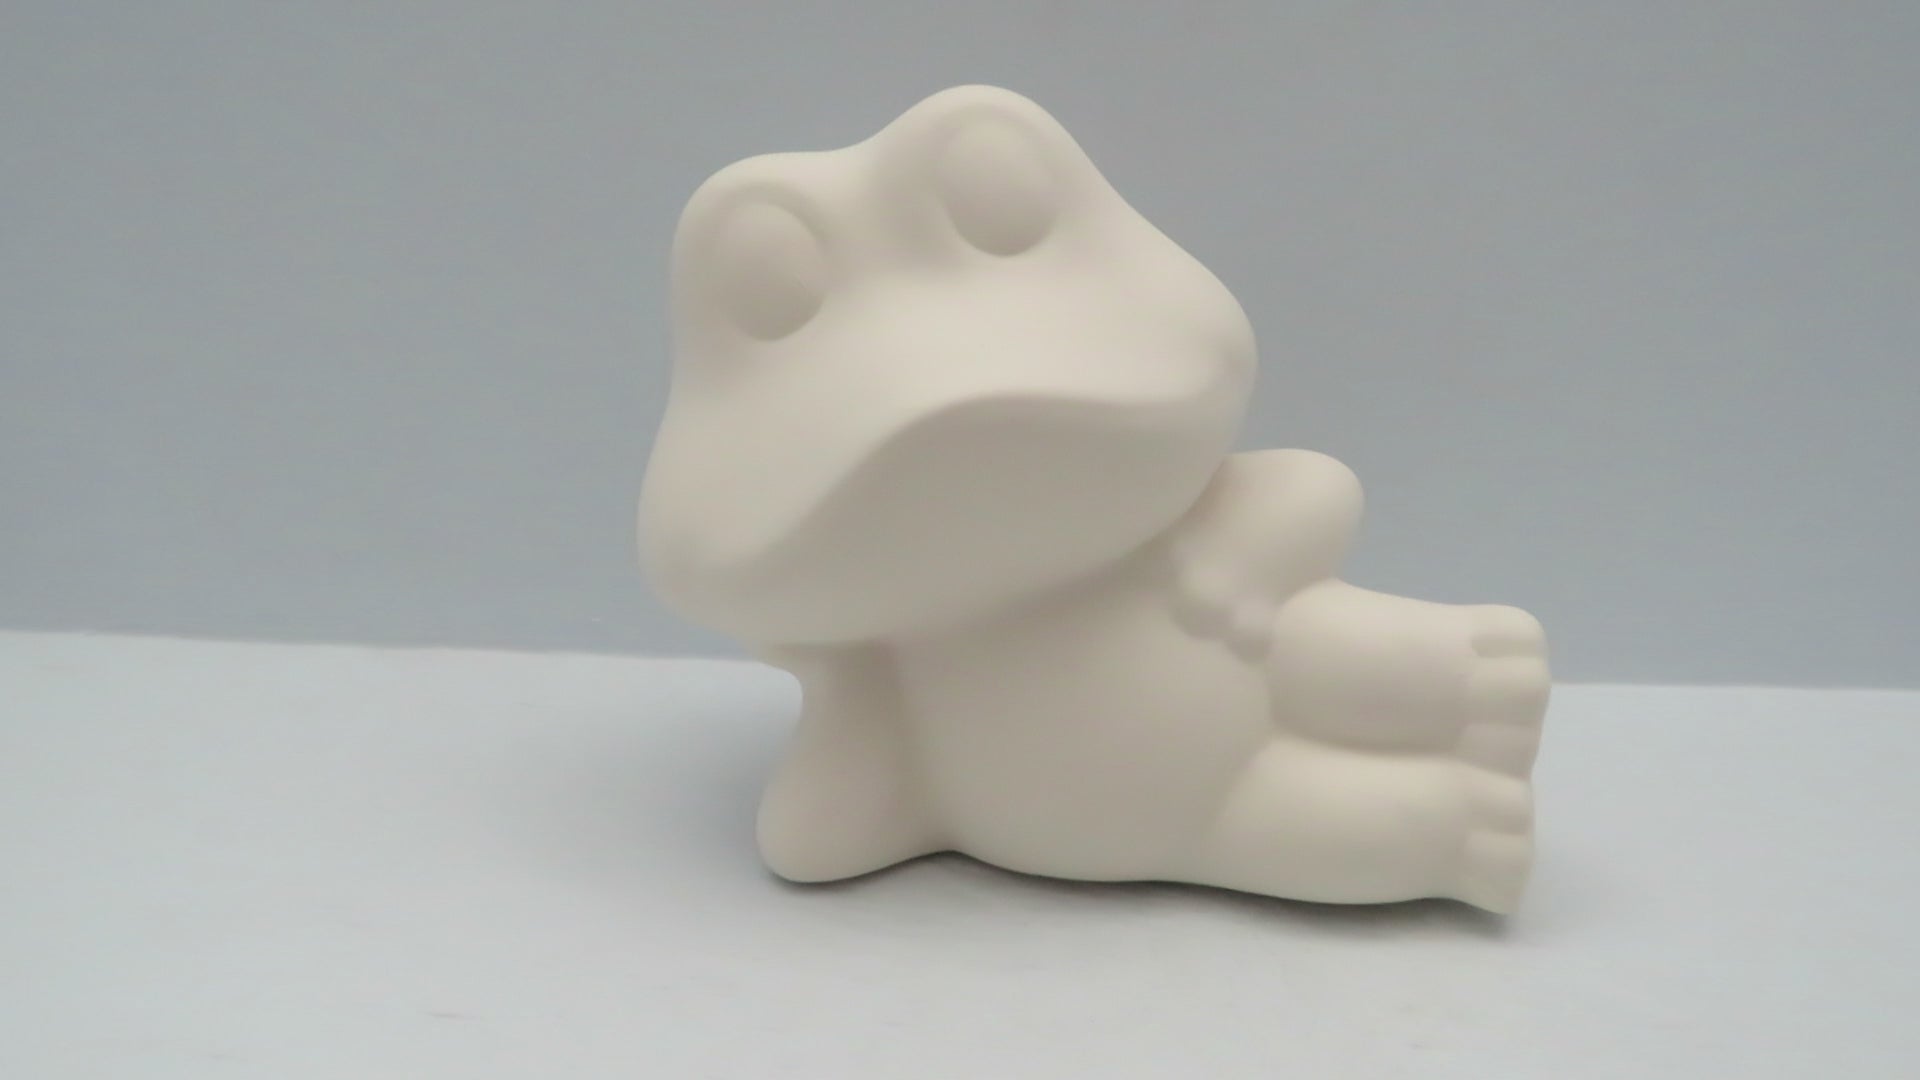 Video showing this ready to paint ceramic frog statue with my hand turning it around so you can see all sides.